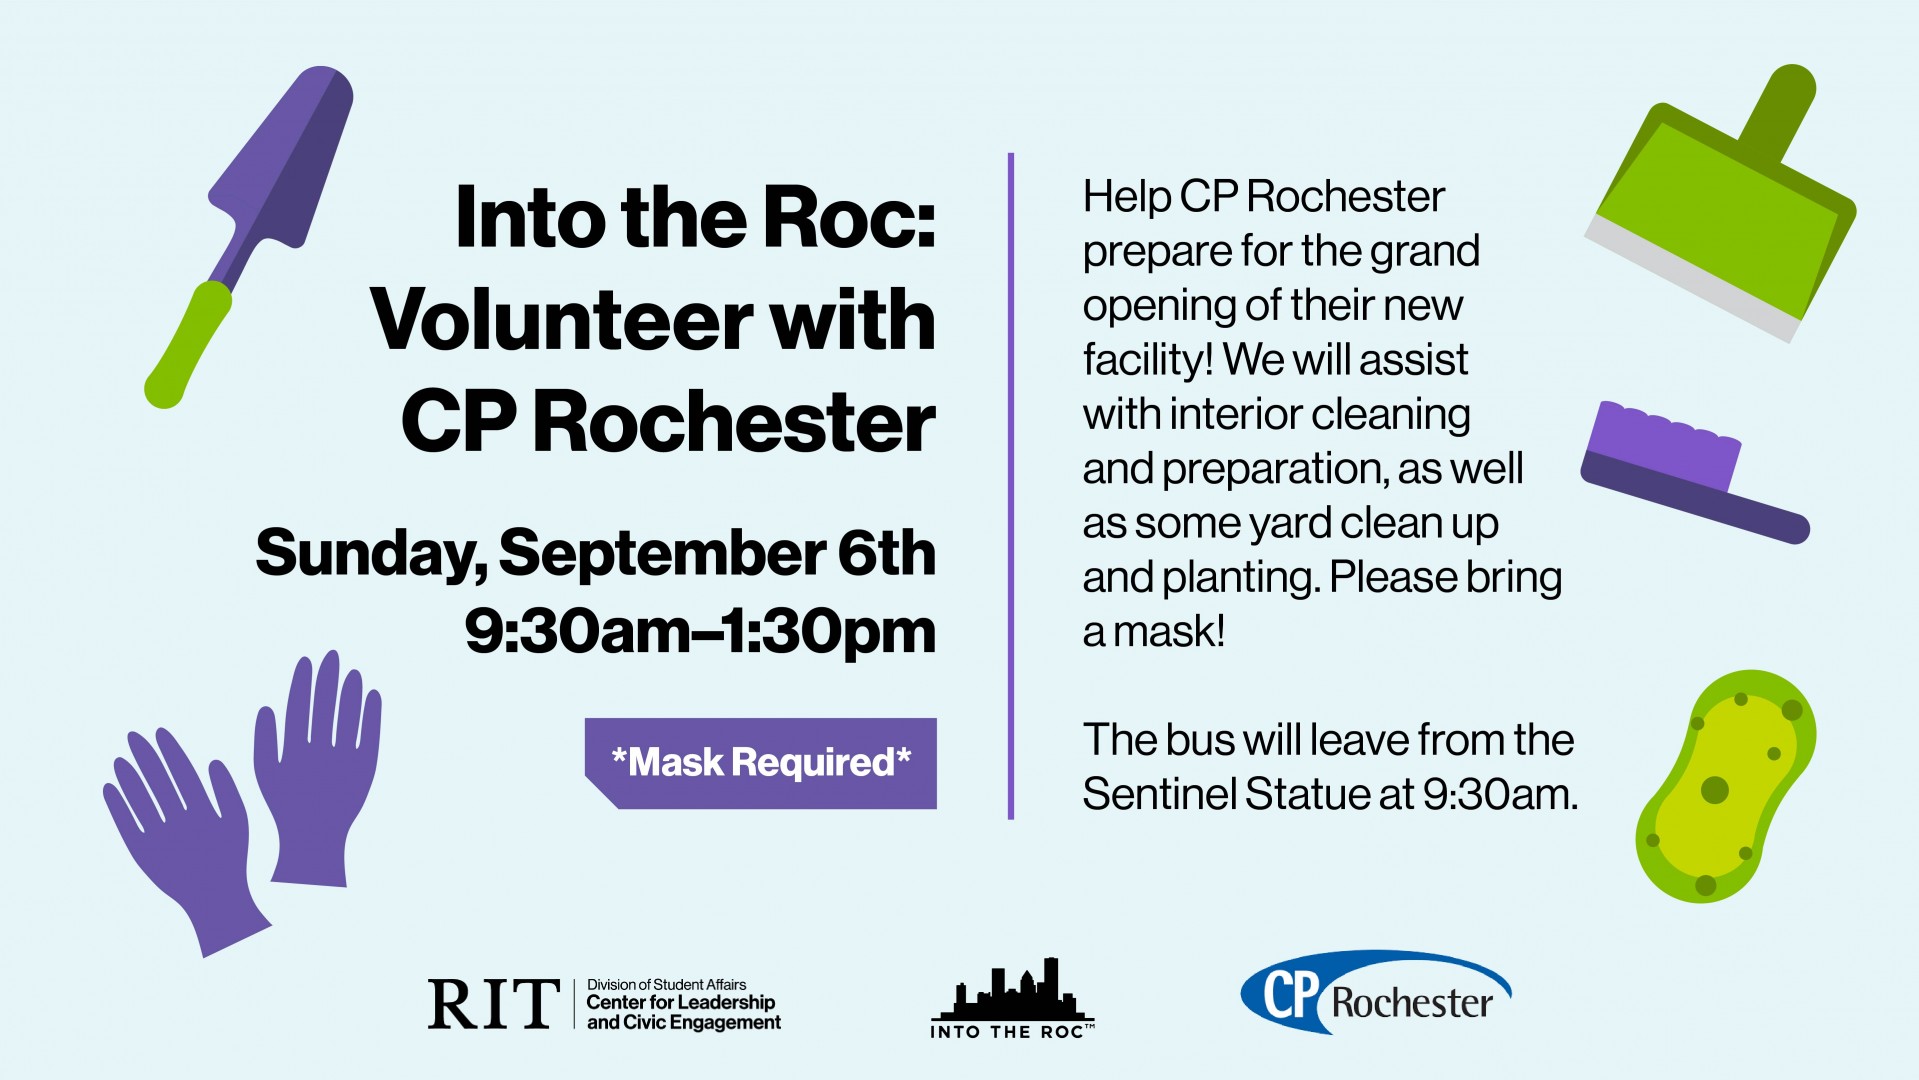 Into the ROC: CP Rochester. Sunday, September 6 9:30 am to 1:30 pm. Volunteer with CP Rochester as we prepare for the grand opening of their new facility. We will assist with interior cleaning and preparation, as well as some yard clean up and planting. Please bring a mask. The bus will leave from the Sentinel statue at 9:30am. Sign up at campusgroups.rit.edu/clce